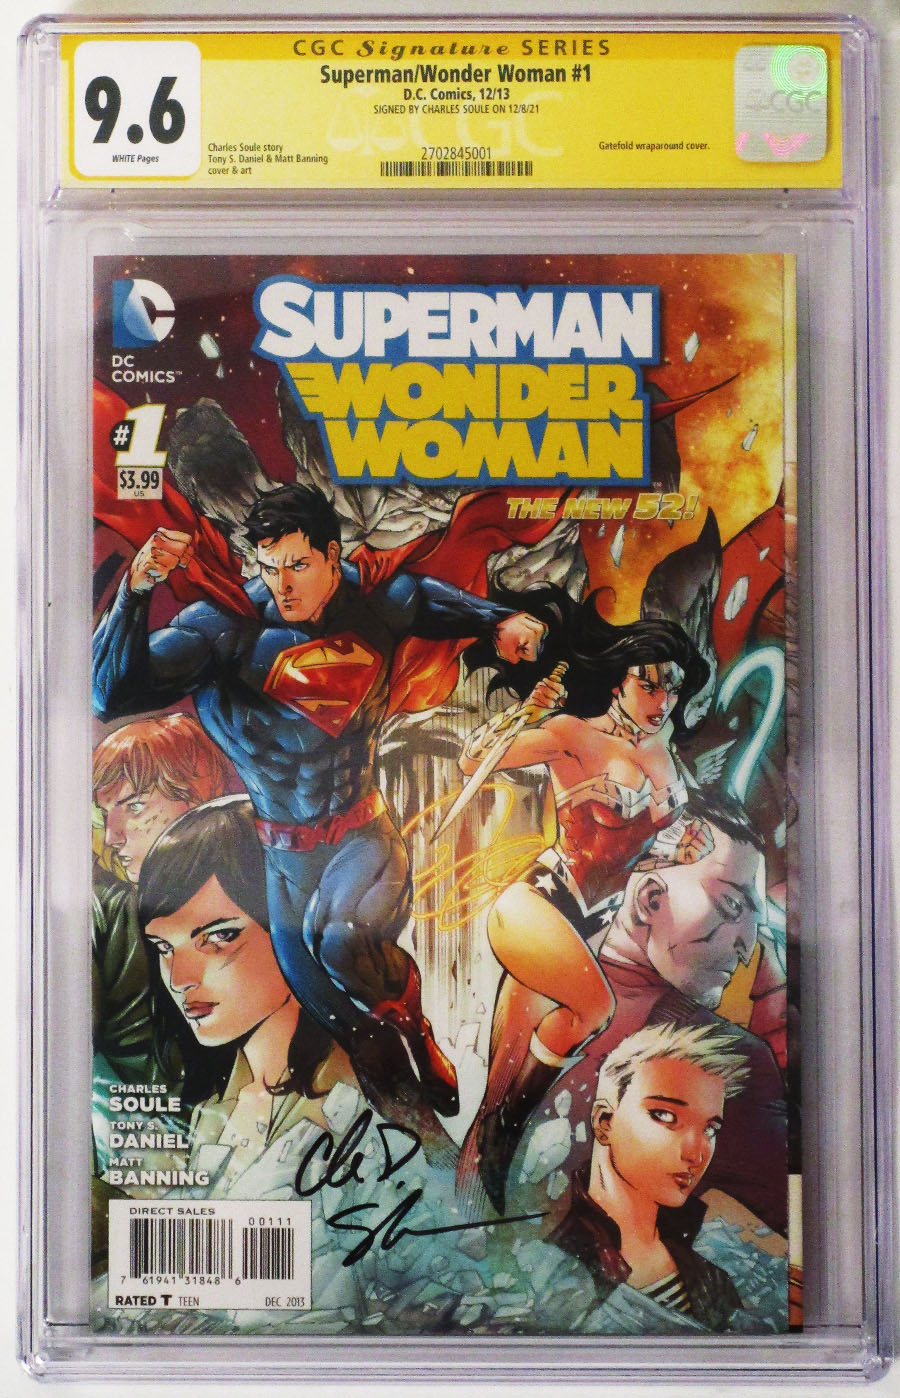 Superman Wonder Woman #1 Cover I Regular Tony S Daniel Cover Signed By Charles Soule CGC 9.6